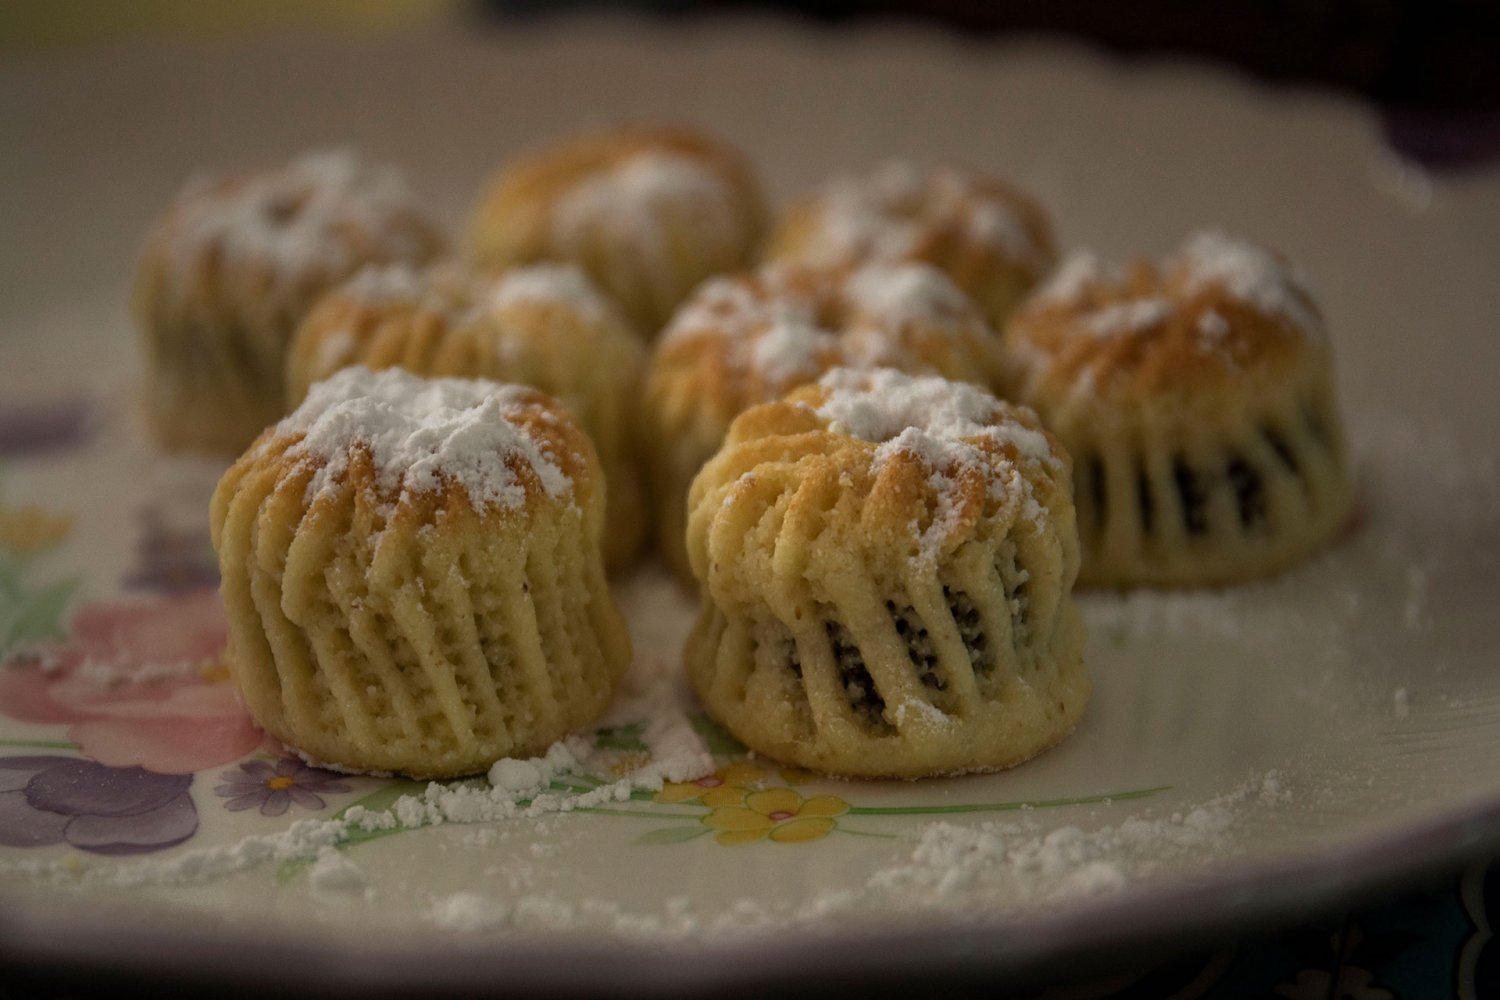 Middle Eastern pastries, ka'ek stuffed with dates, dusted with powdered sugar